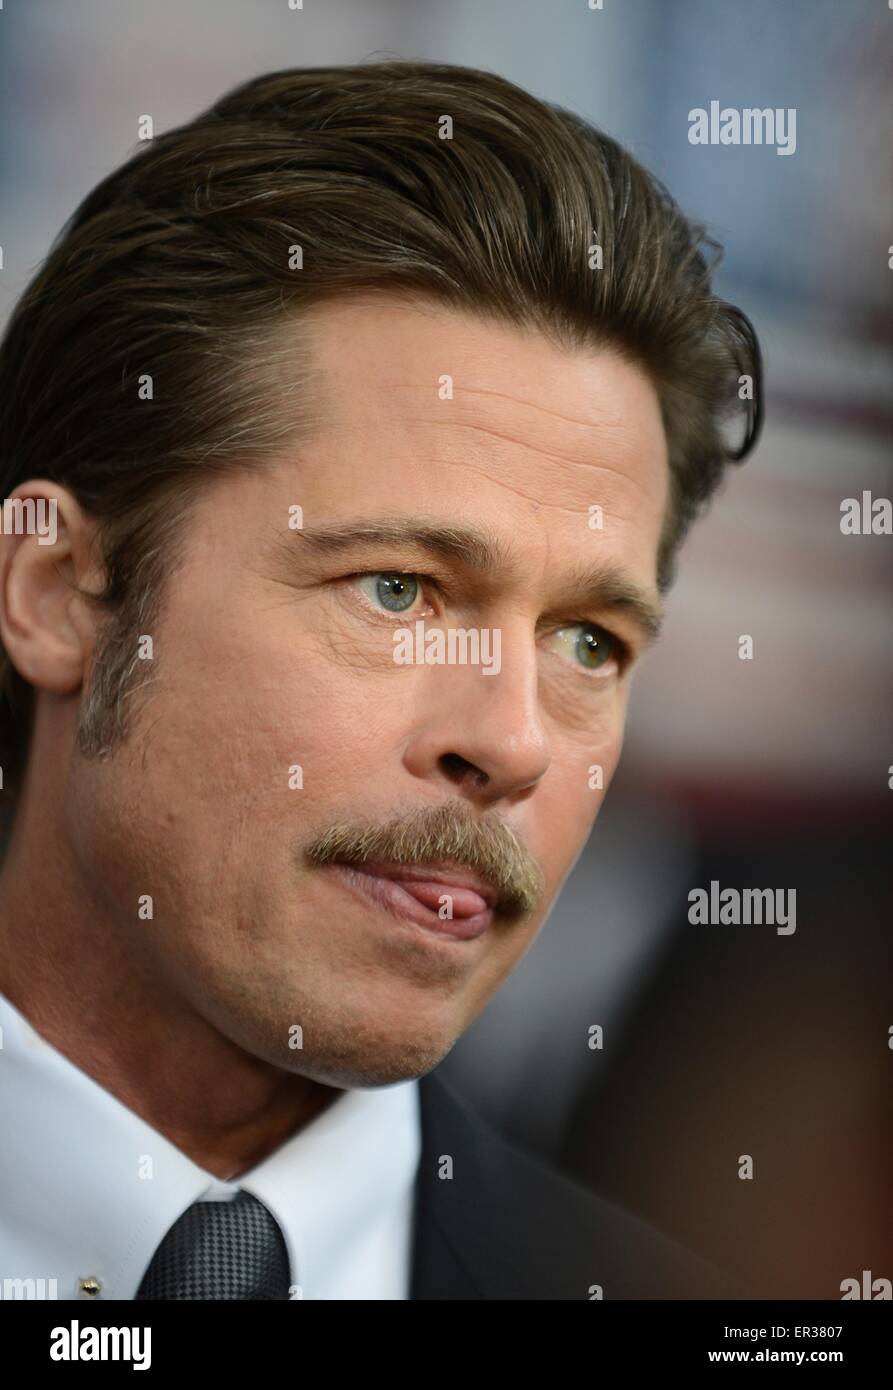 Actor Brad Pitt at the premier of the blockbuster movie Fury at